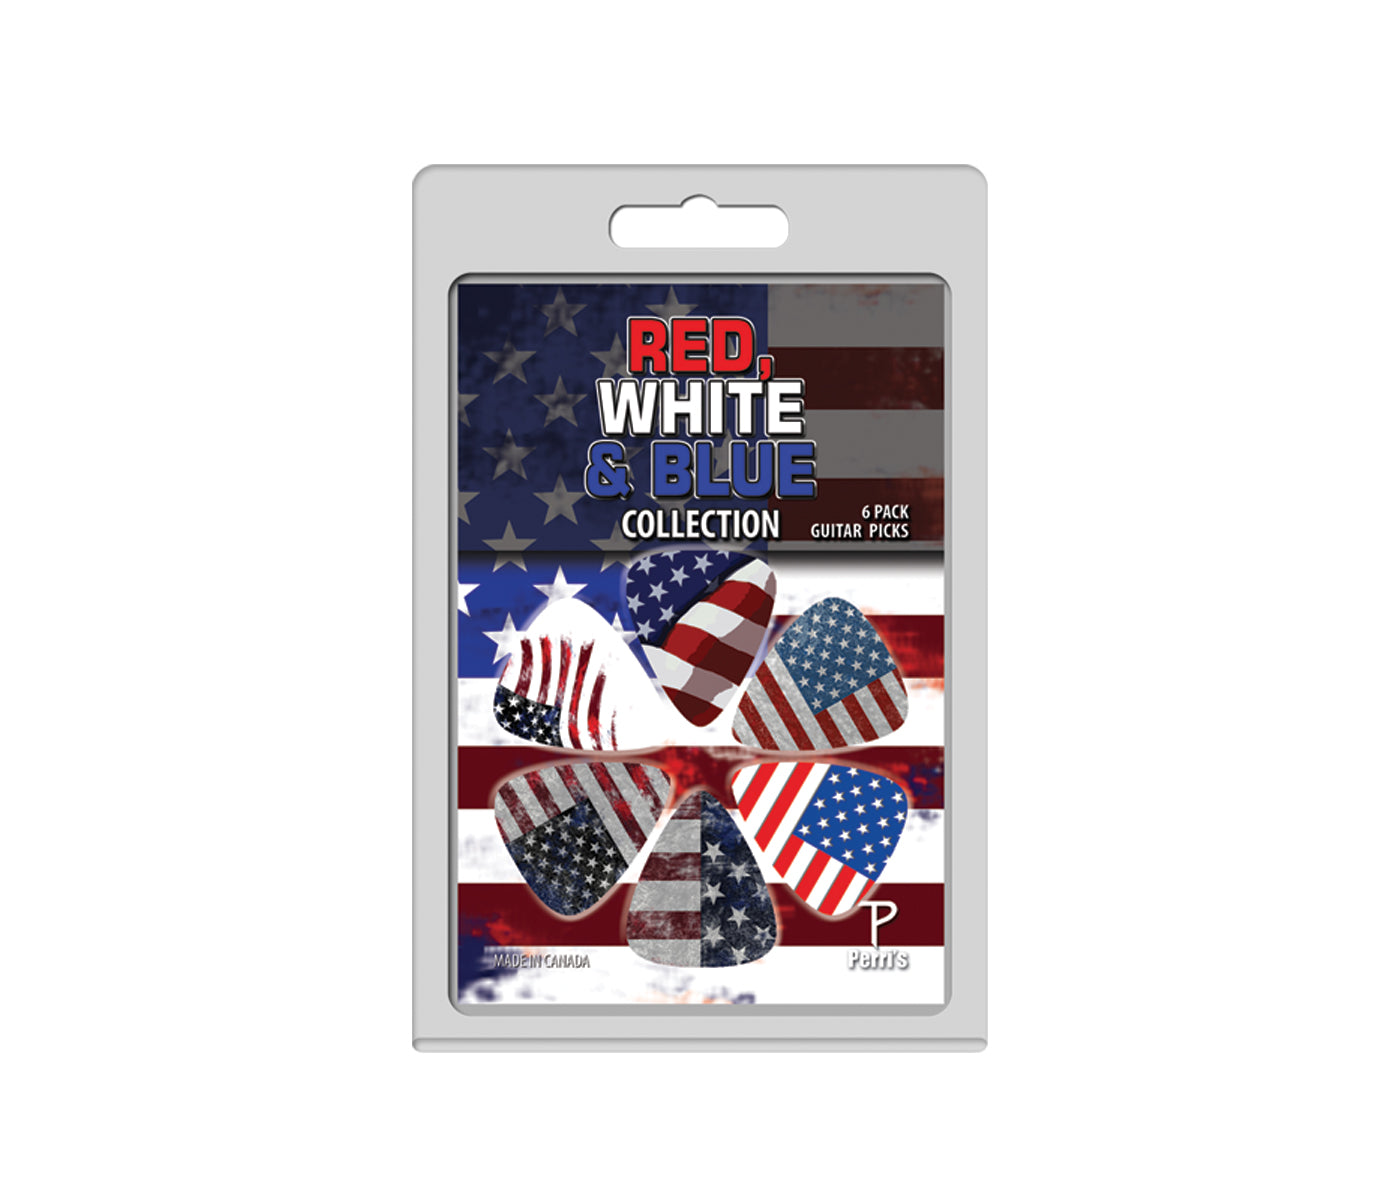 GUITAR PICKS 6 PACK THE RED, WHITE & BLUE USA